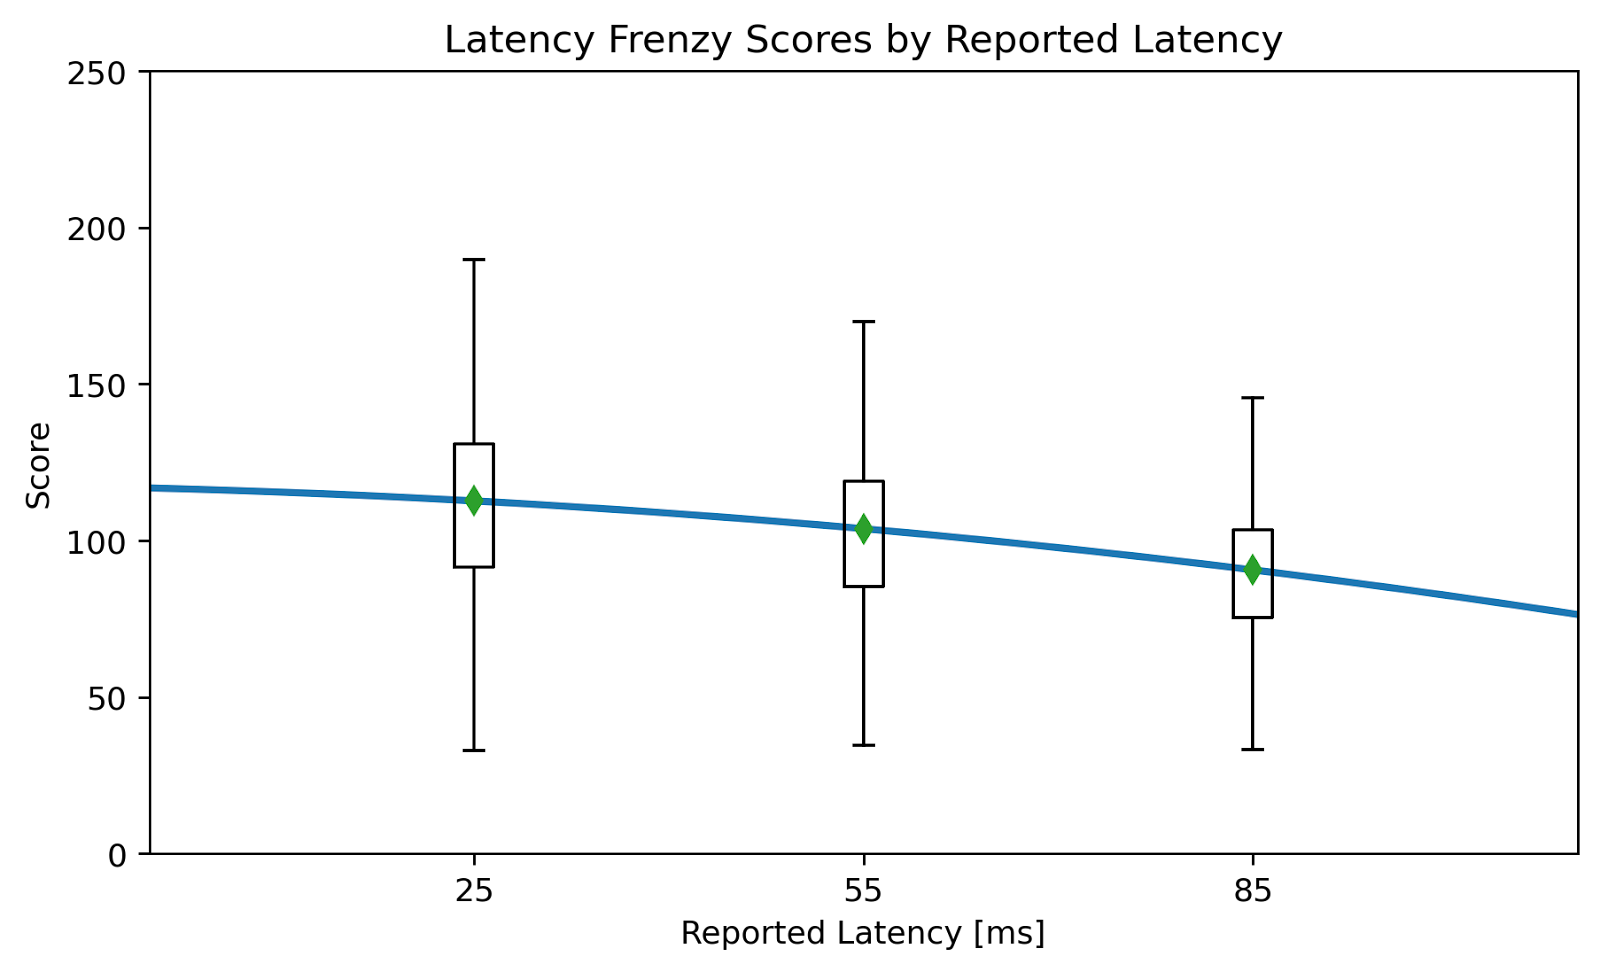 Box and whisker plot with trend line for Latency Frenzy.